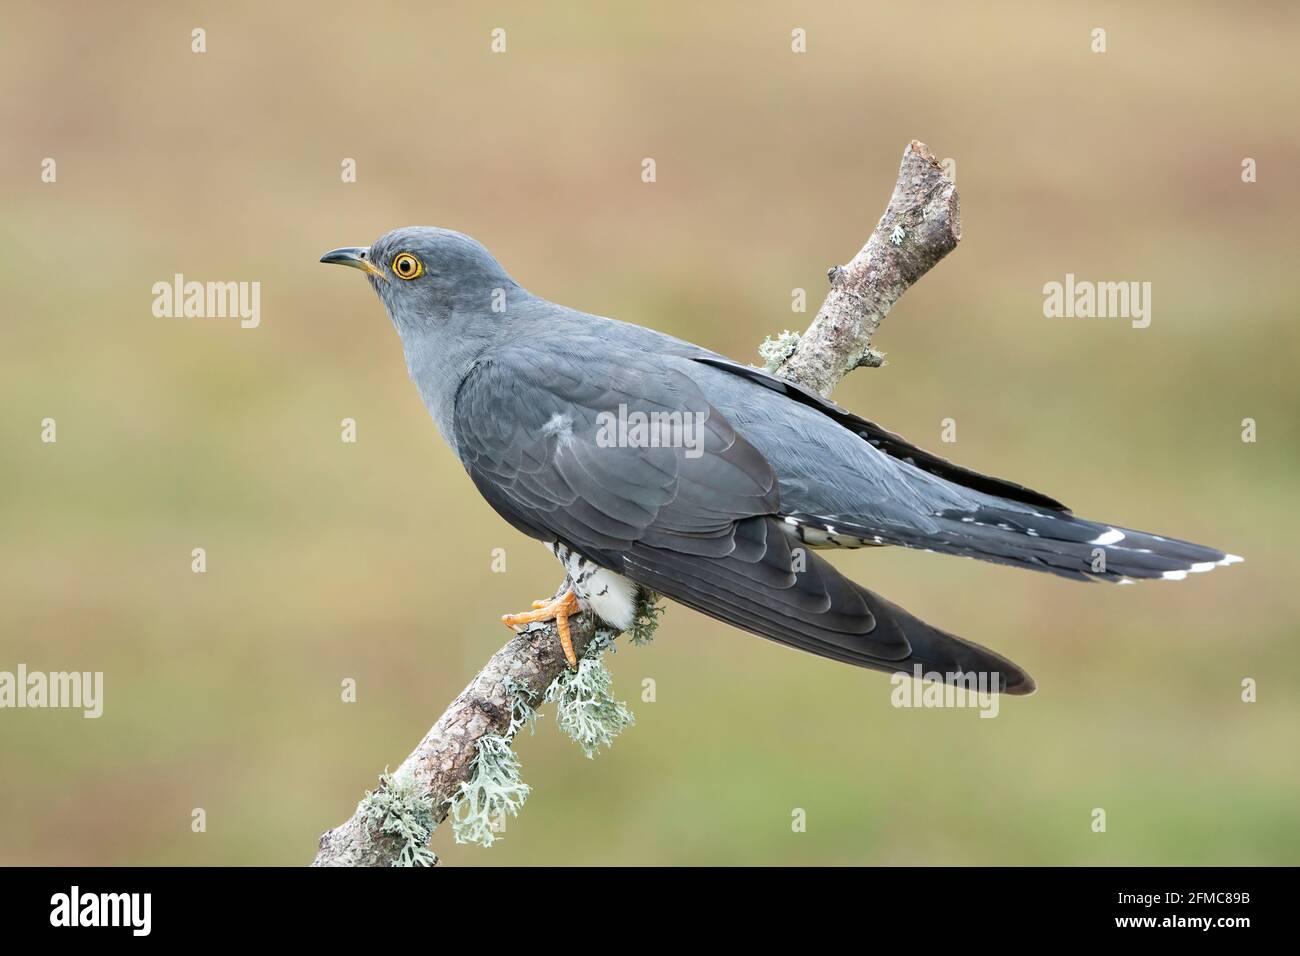 common cuckoo, Cuculus canorus, Colin the cuckoo, single adult male perched on tree branch, Thursley Common, Surrrey, United Kingdom Stock Photo